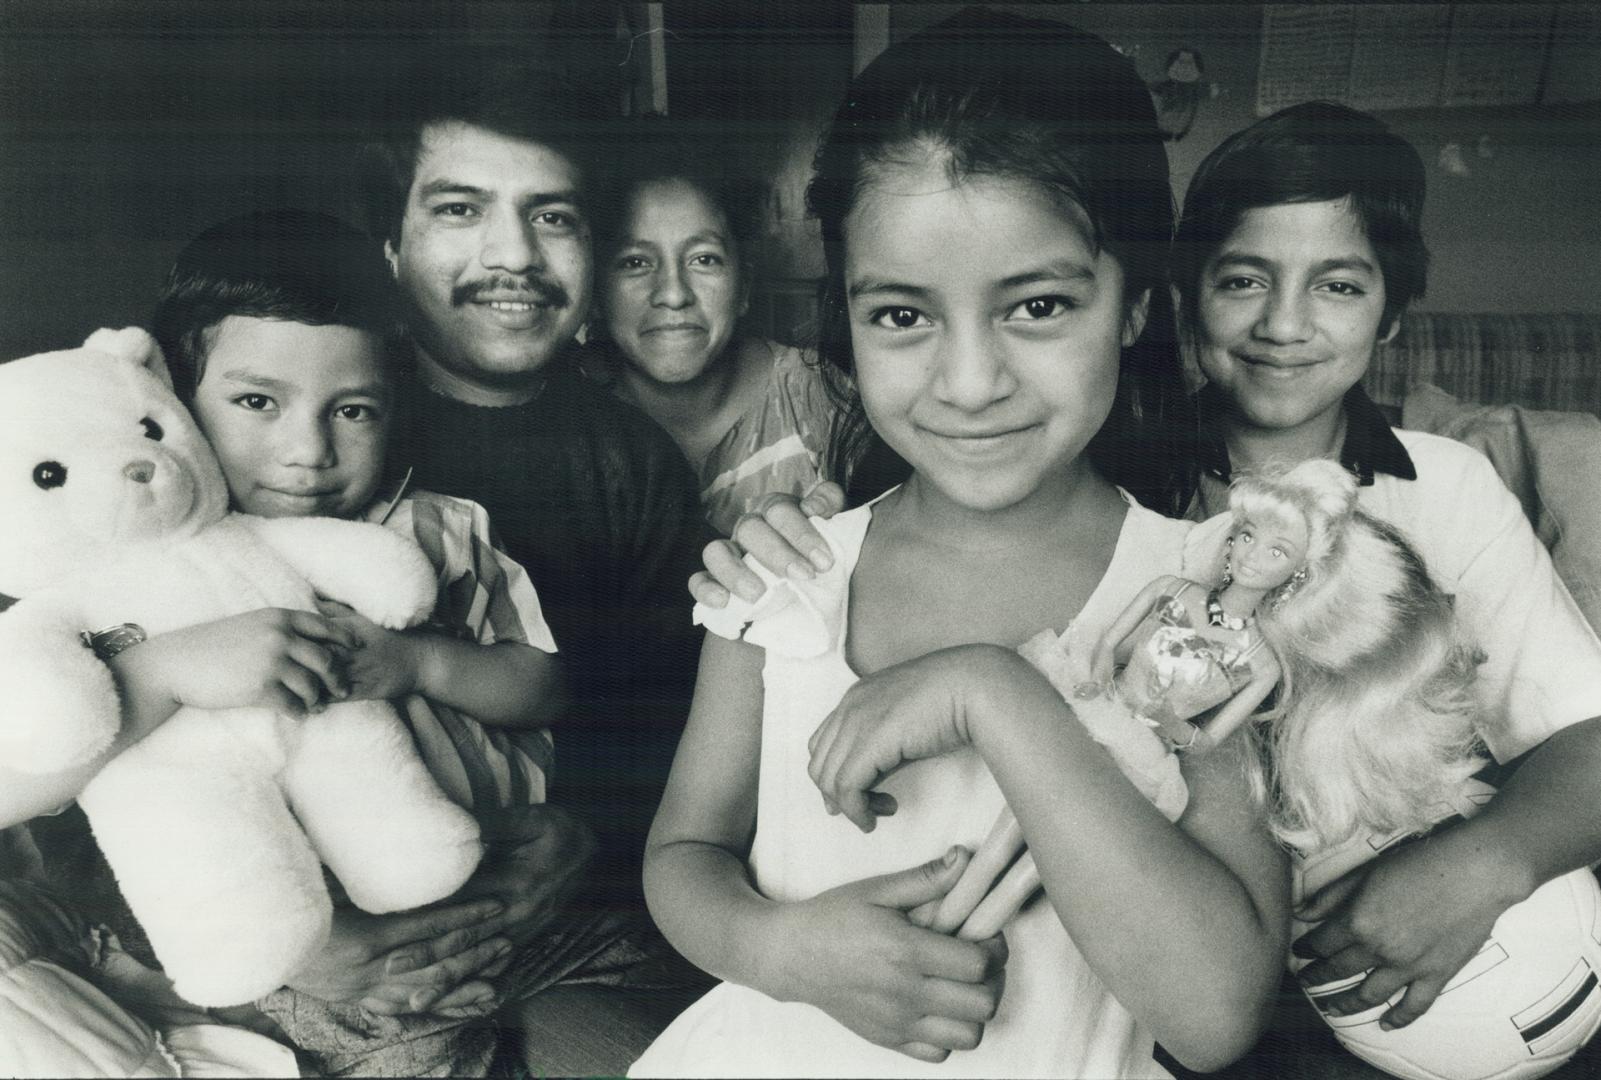 Reunited Family: from left, 5-year-old Walter Lopez, with parents Ignacio and Amalla, and siblings Norma, 7, and Maroio, 12.